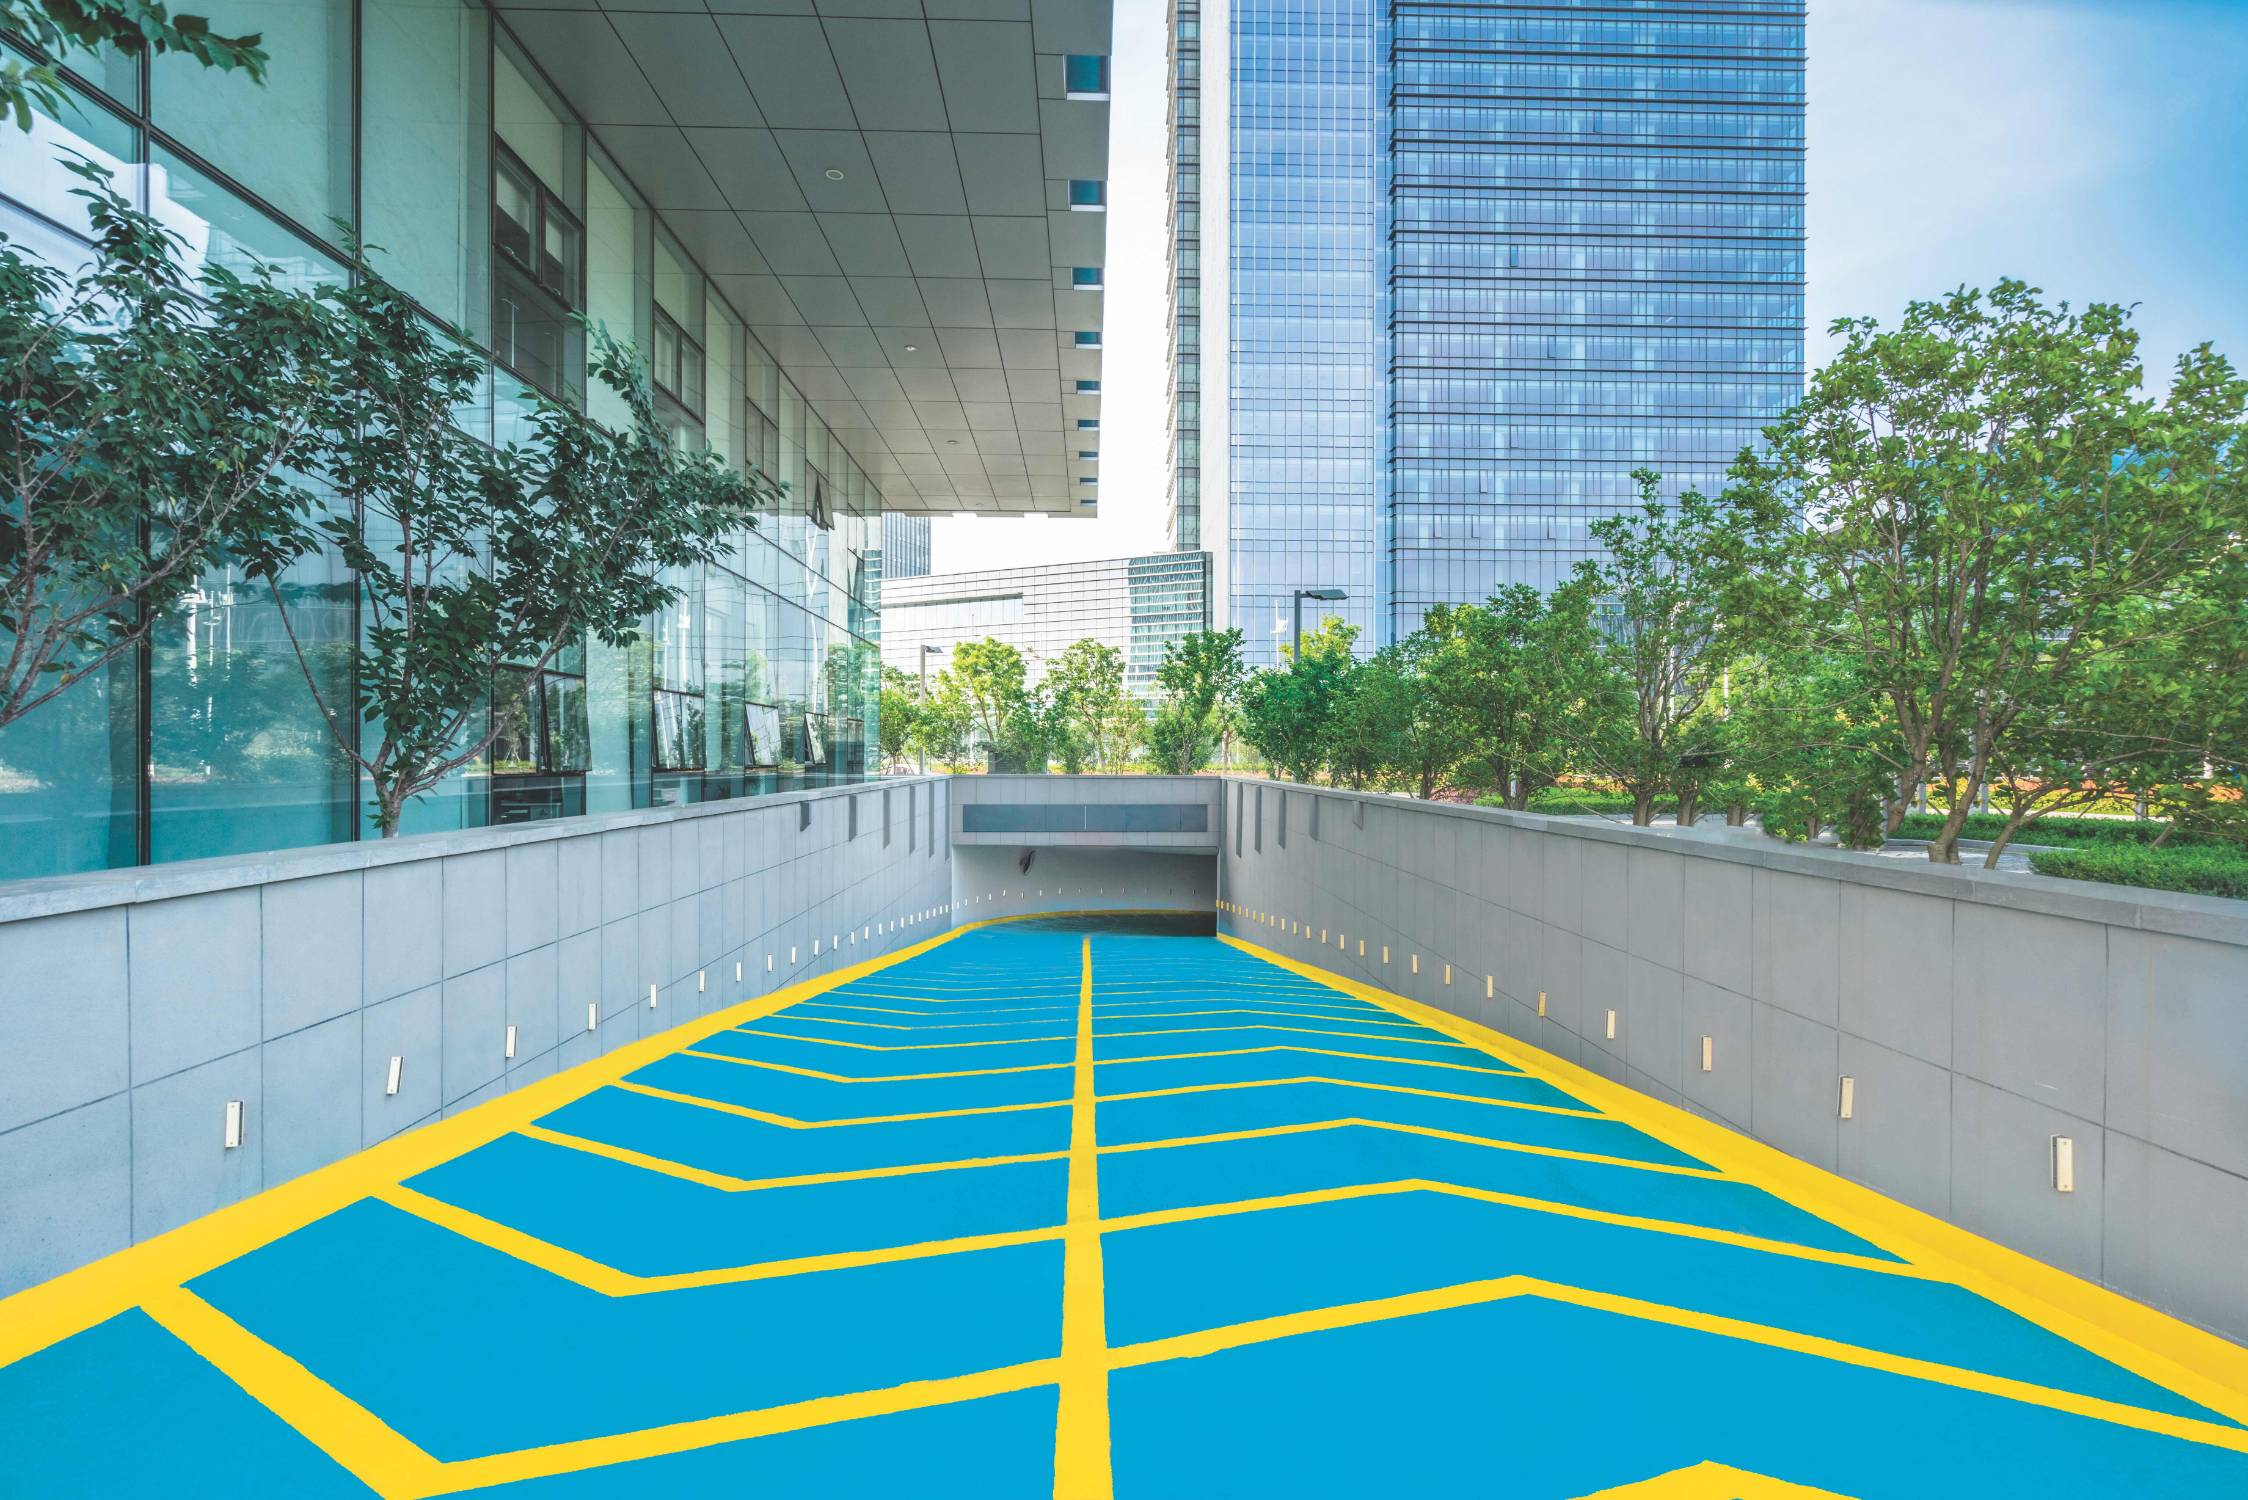  Vetotop UC371- Heavy Duty High Build Polyurethane Carpark System for Exterior Applications